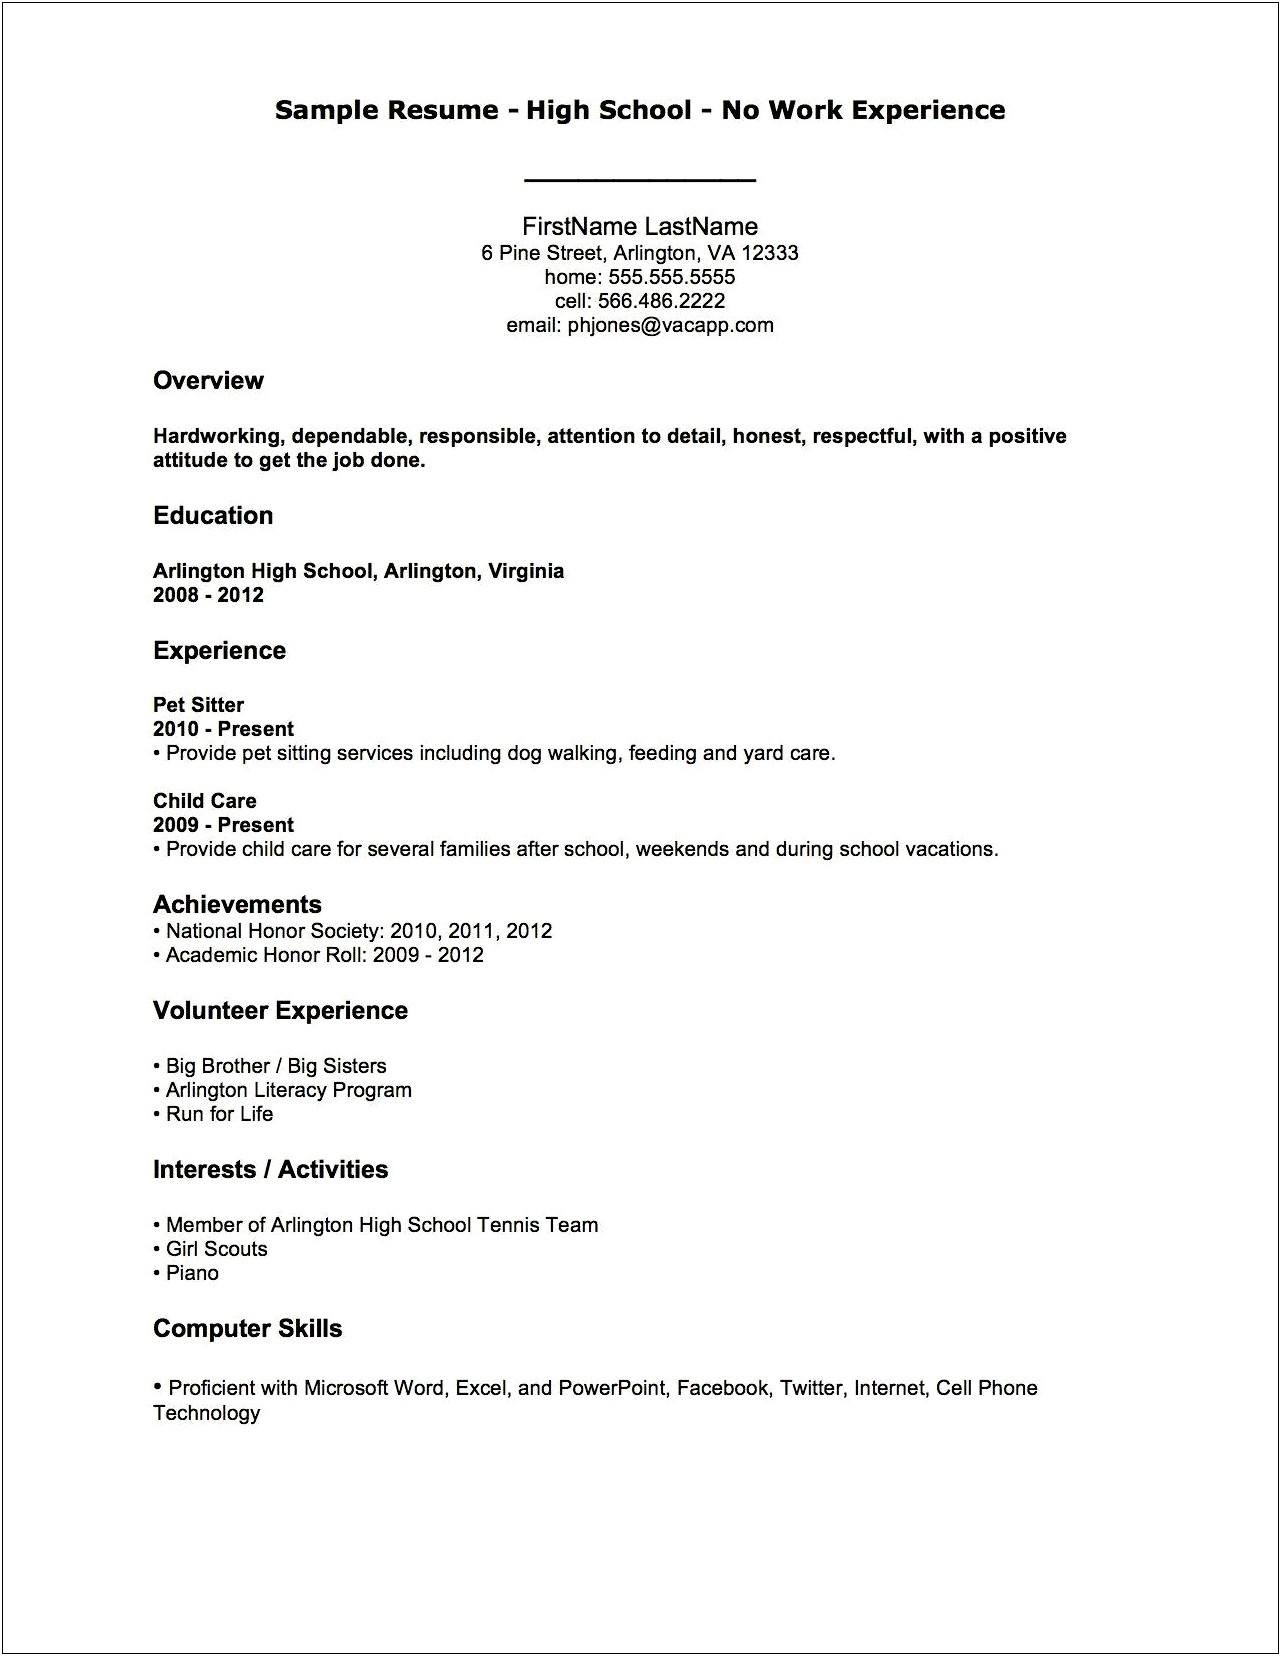 Professional Resume With No Job Experience